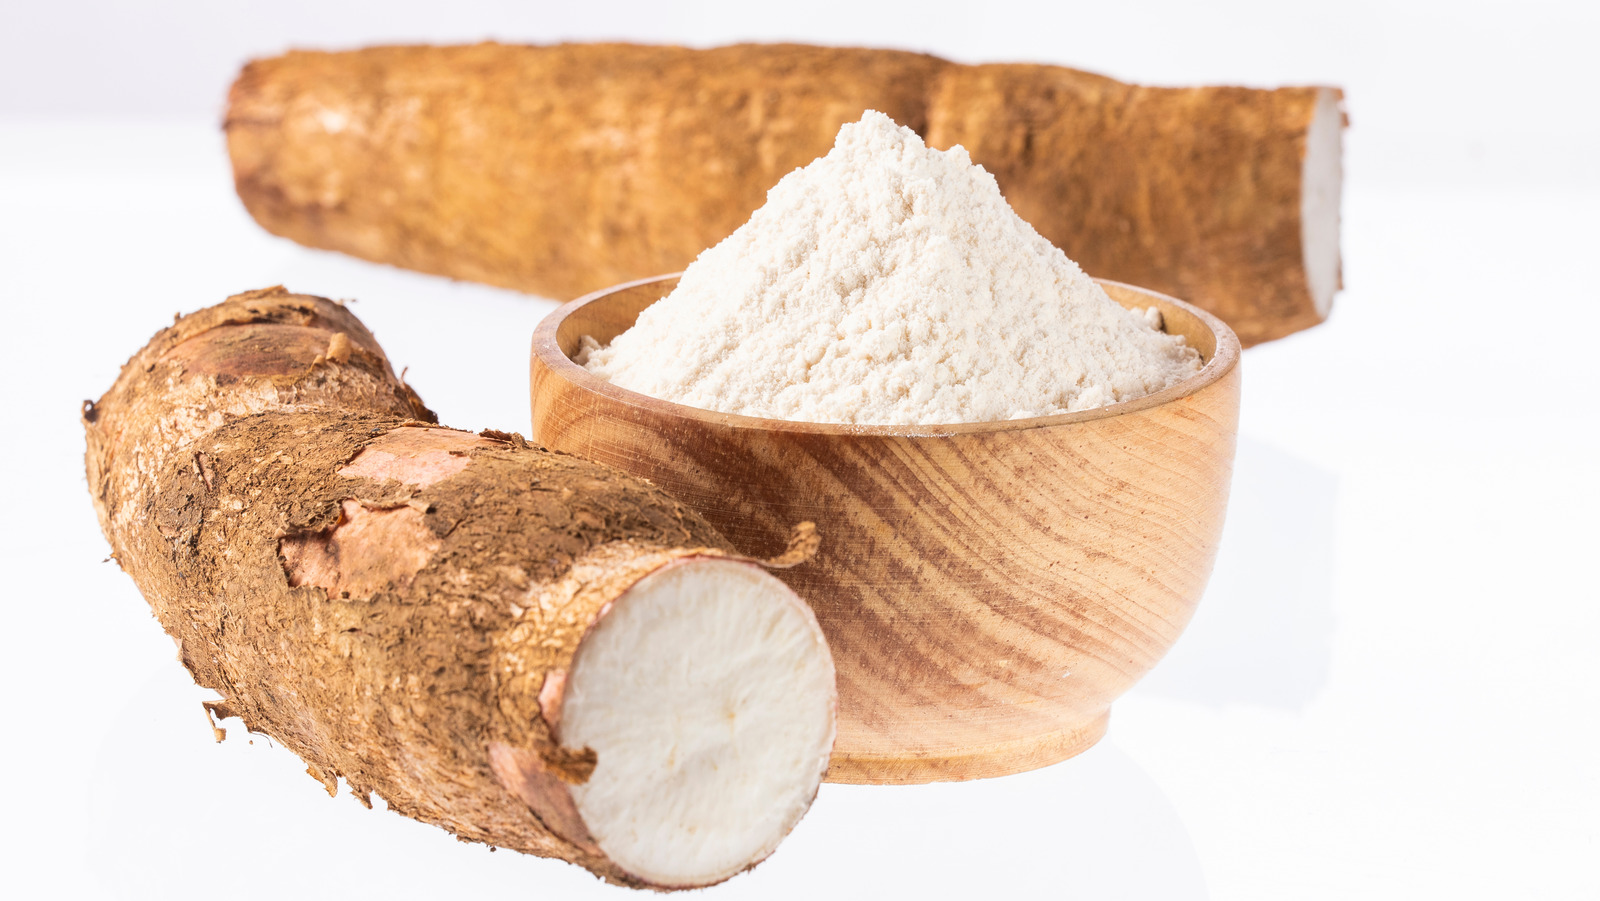 What Is Arrowroot And What Does It Taste Like?